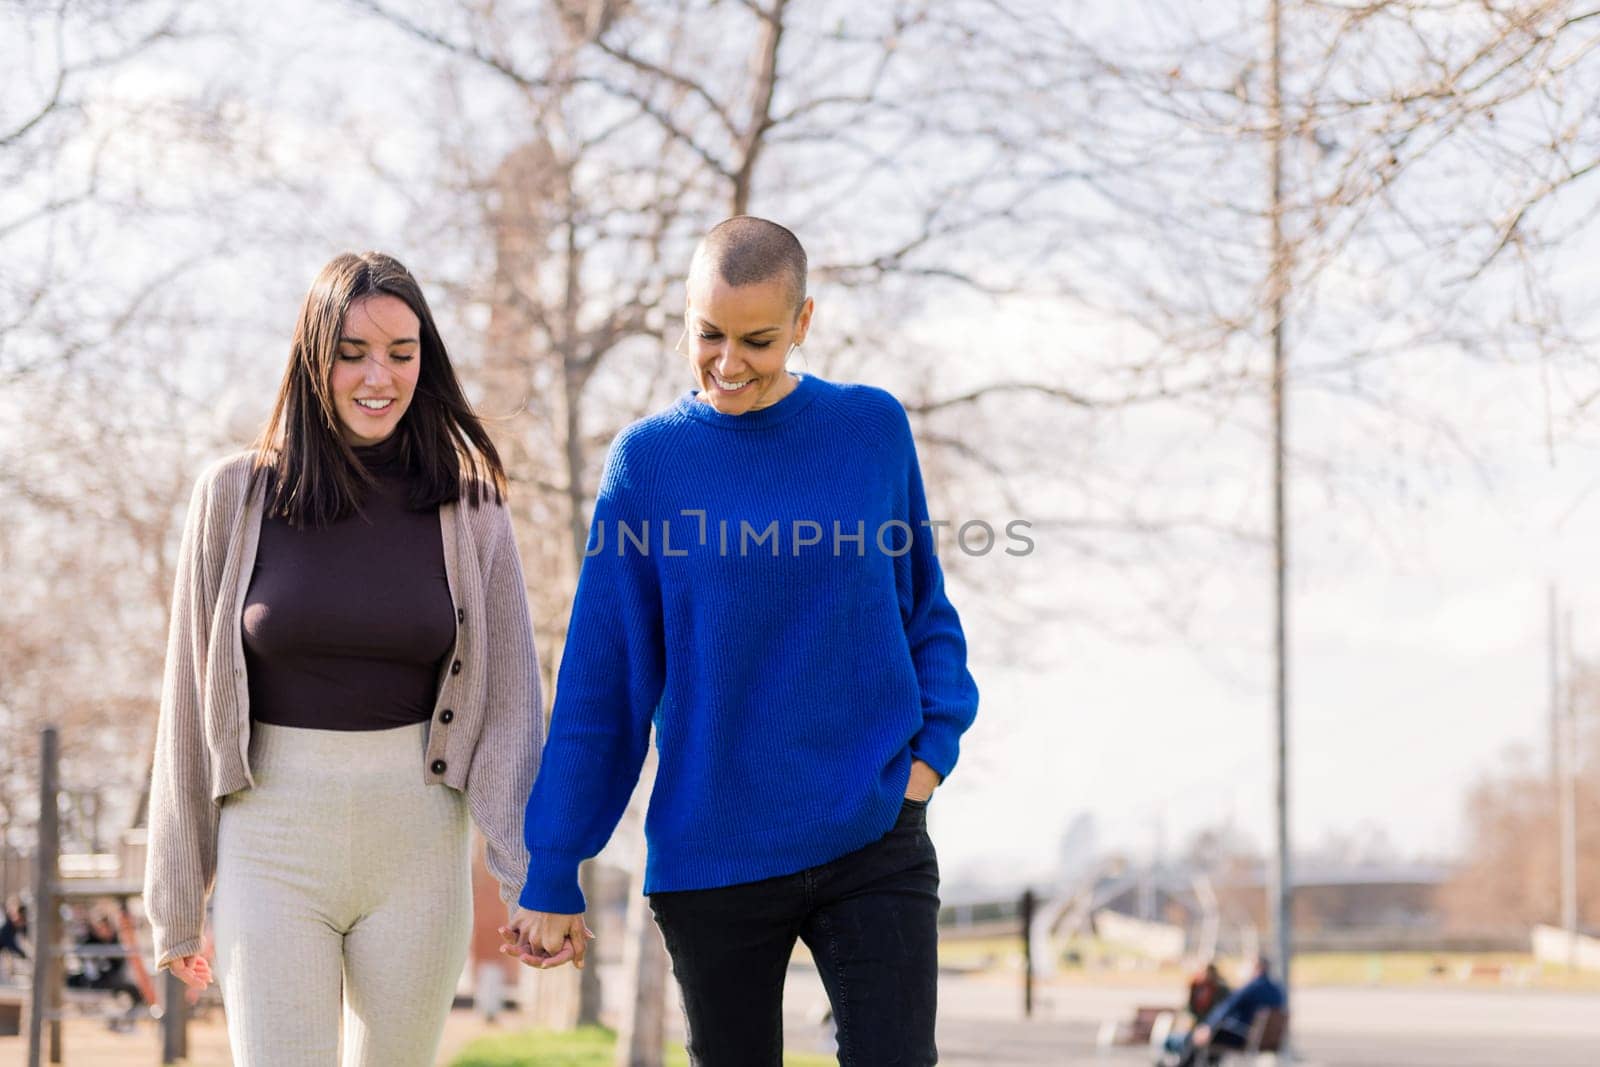 lesbian couple of two young women smiling happy taking a romantic walk in a city park, concept of freedom and love between people of the same sex